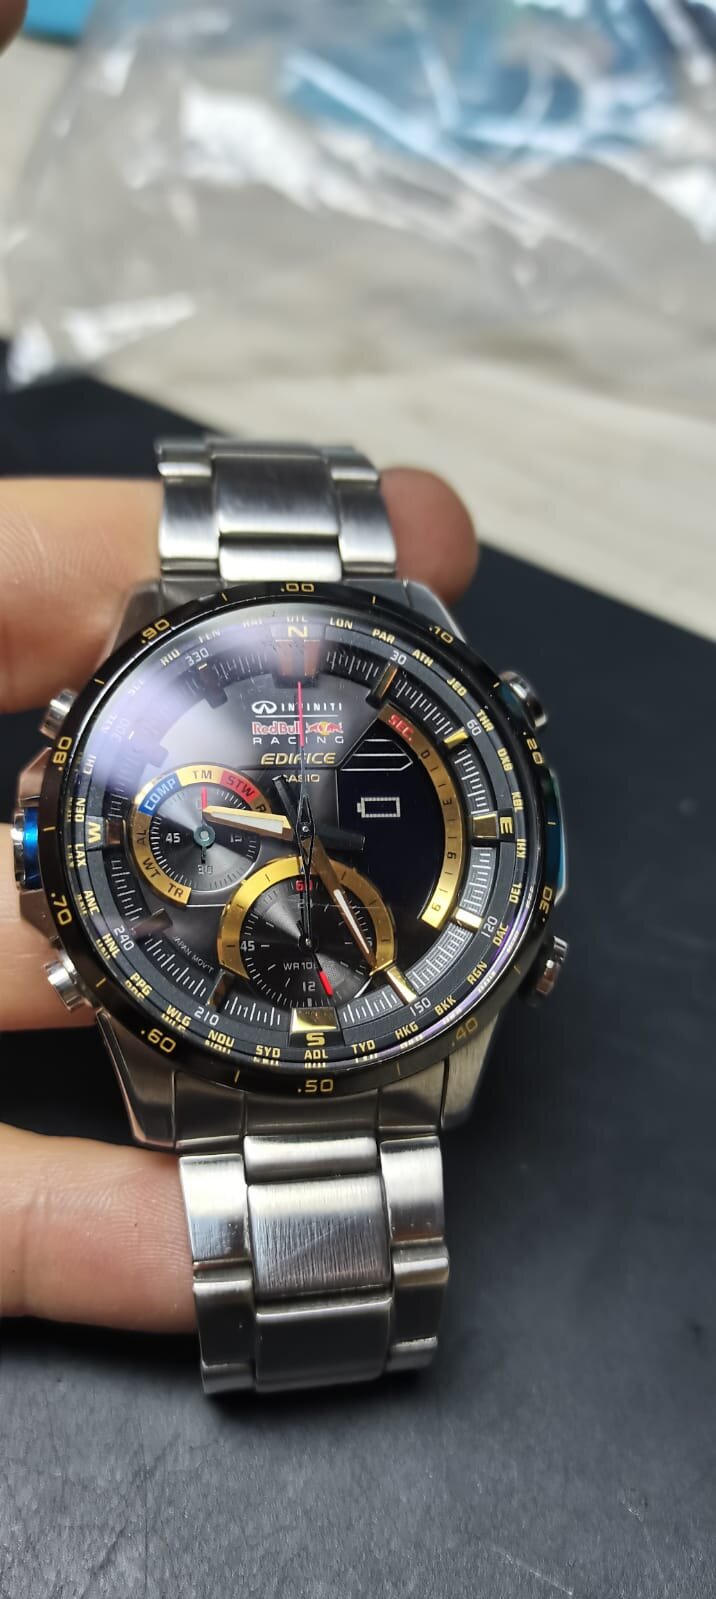 Mince Formand person Casio Edifice Infiniti Red Bull Racing watch repair ERA - 300RB 5366 in for  new batteries from Buckley, Flintside. | Watches Fixed | Watch Repairs |  Latest Watch News | Watch Hub